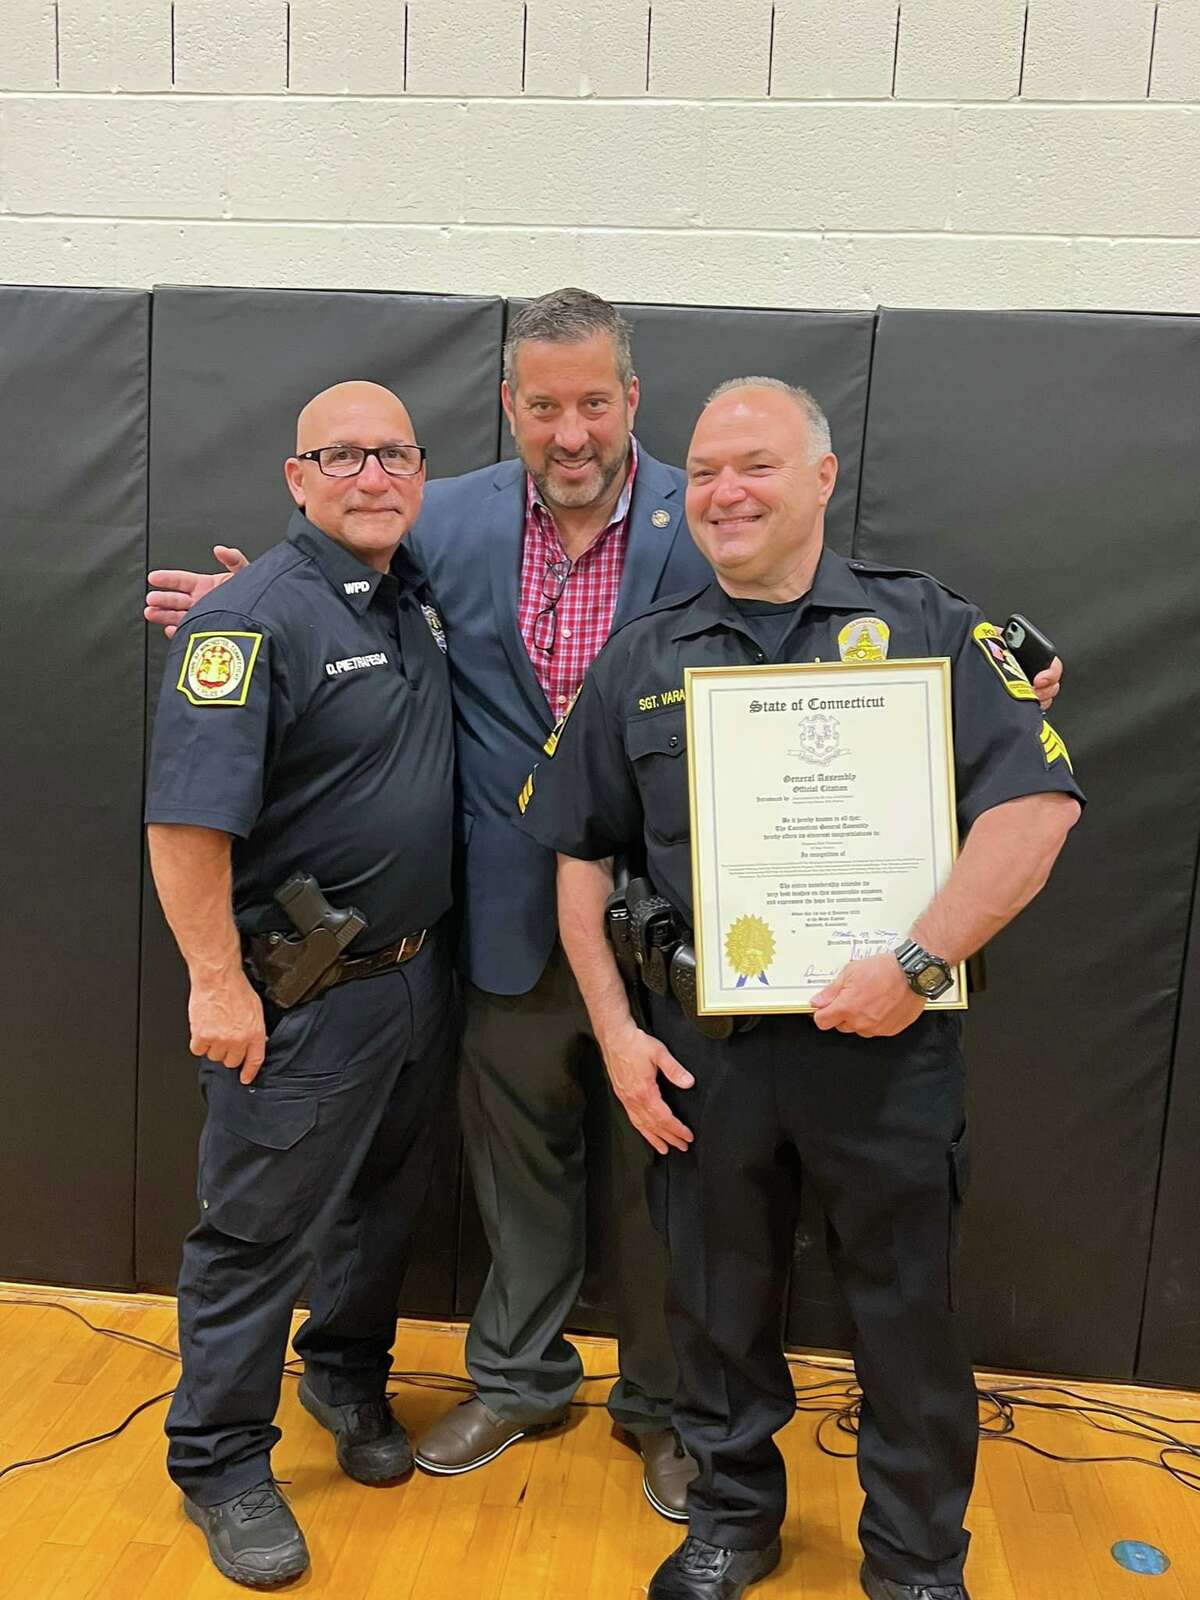 Two members of the Winchester Police Department were recently recognized for their long-term leadership of the D.A.R.E. program during its graduation ceremony. The D.A.R.E. (Drug Abuse Resistance Education) program is taught by Winchester's Officer Daniel Pietrafesa, left, and Sergeant (retired) Bob Varasconi. The officers were presented with a legislative citation from State Rep. Jay Case, R-Winsted in recognition of their contributions to the program.